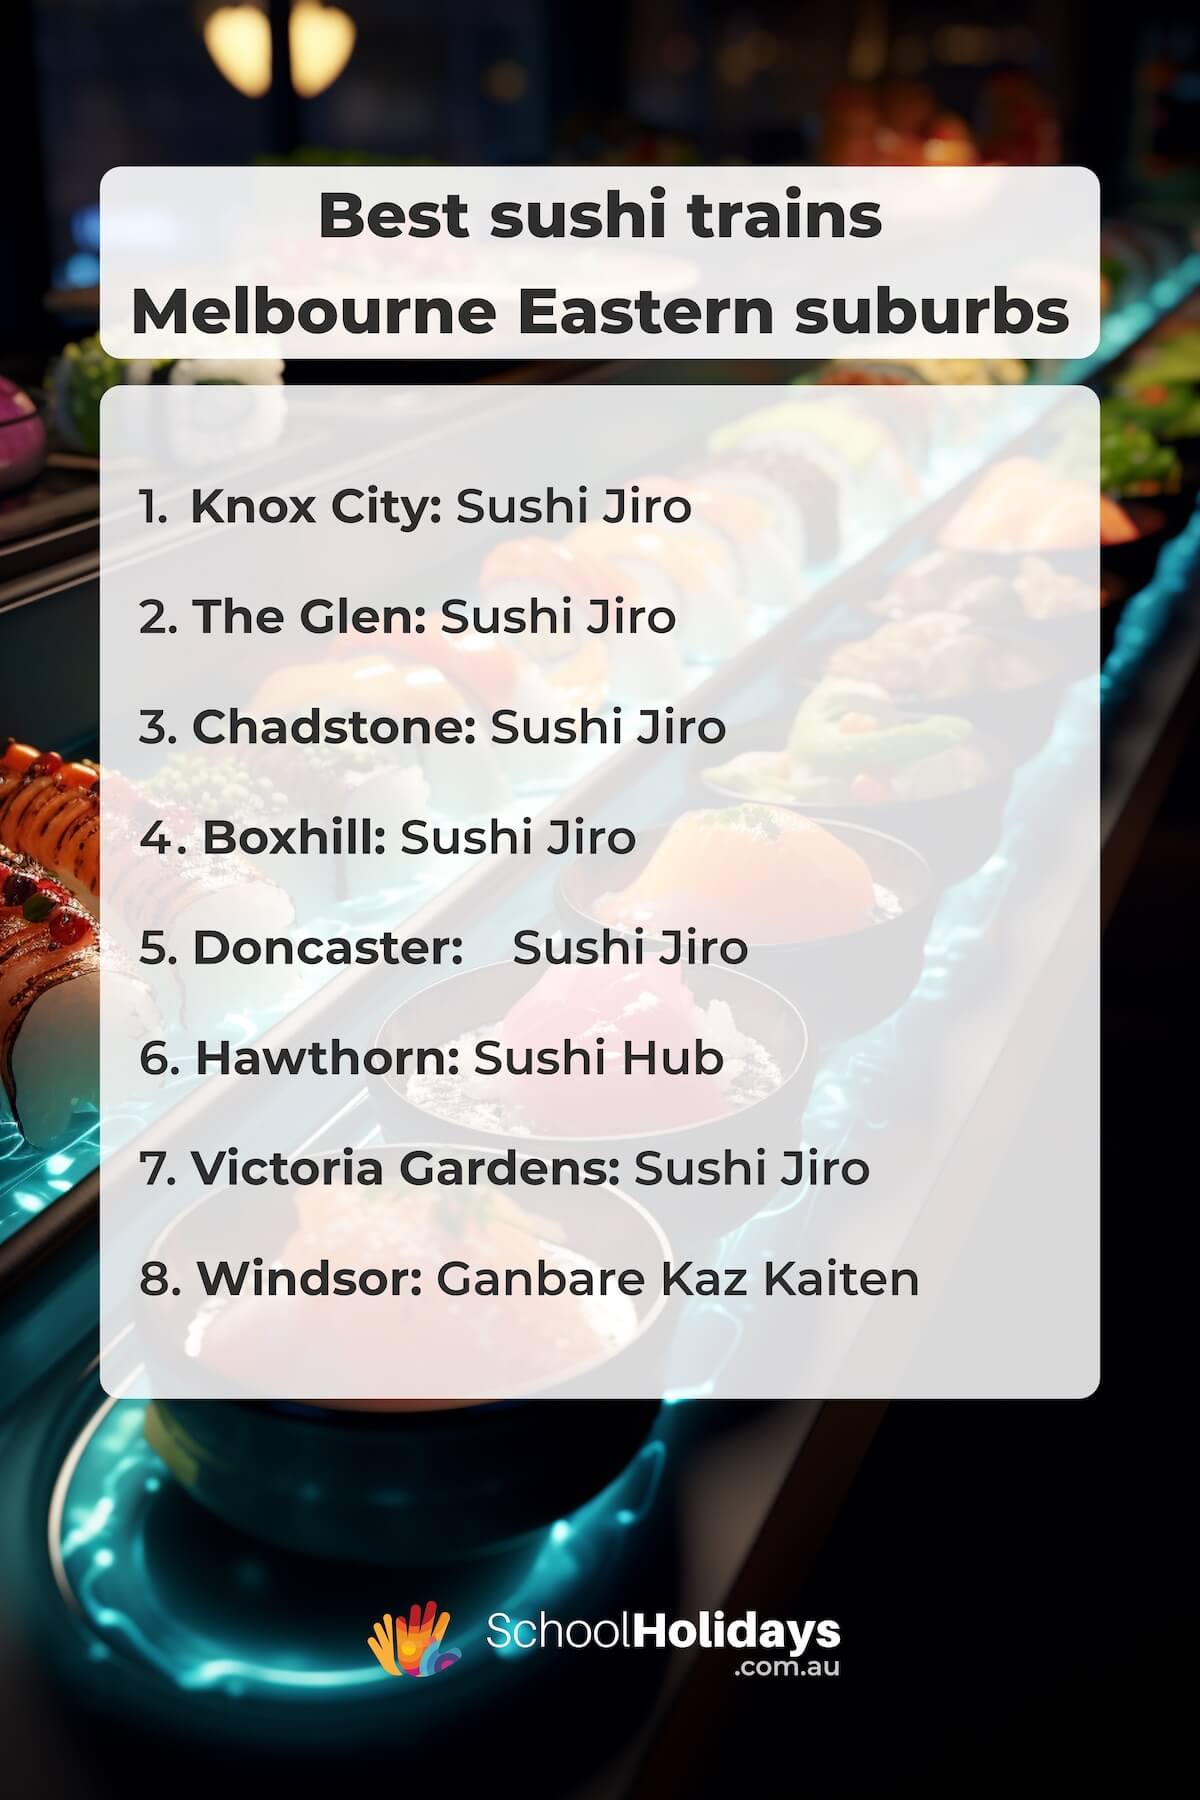 List of Sushi trains in Melbourne Eastern suburbs.